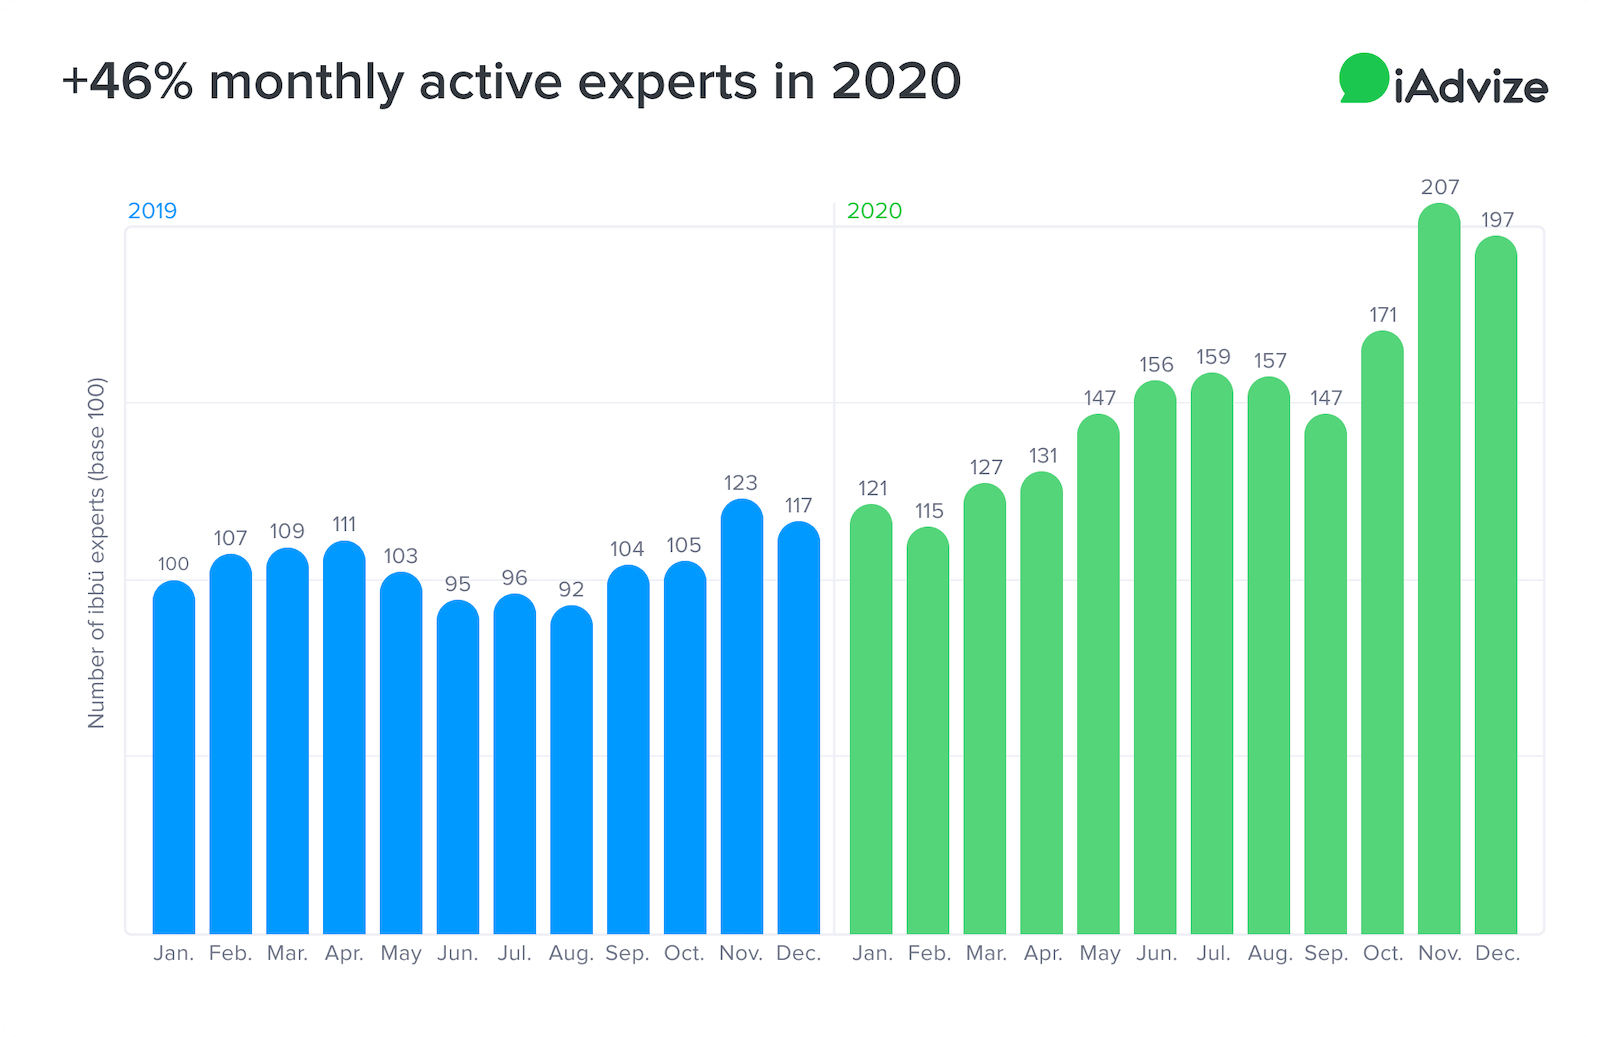 +46% monthly active experts in 2020